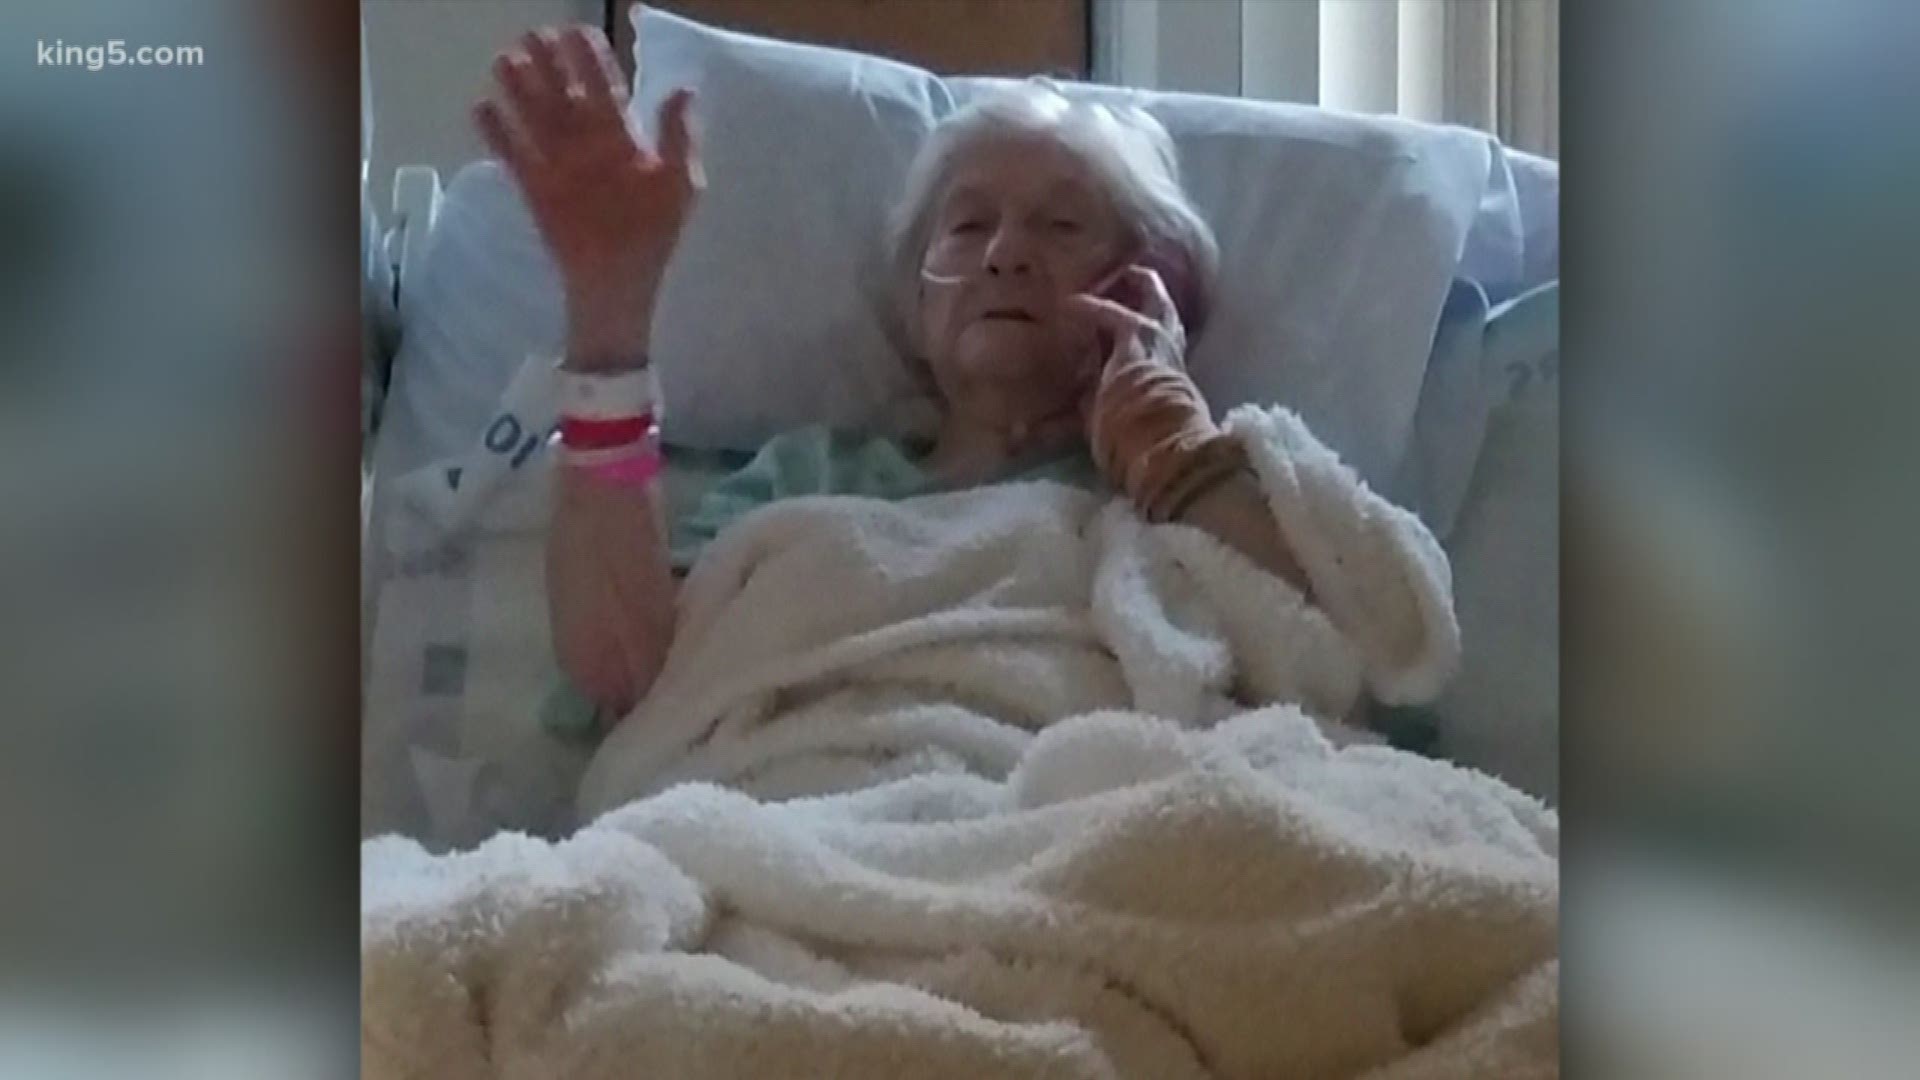 The family of a 90-year-old woman diagnosed with coronavirus says it appears she has beaten the illness. She was staying at the Life Care Center in Kirkland.